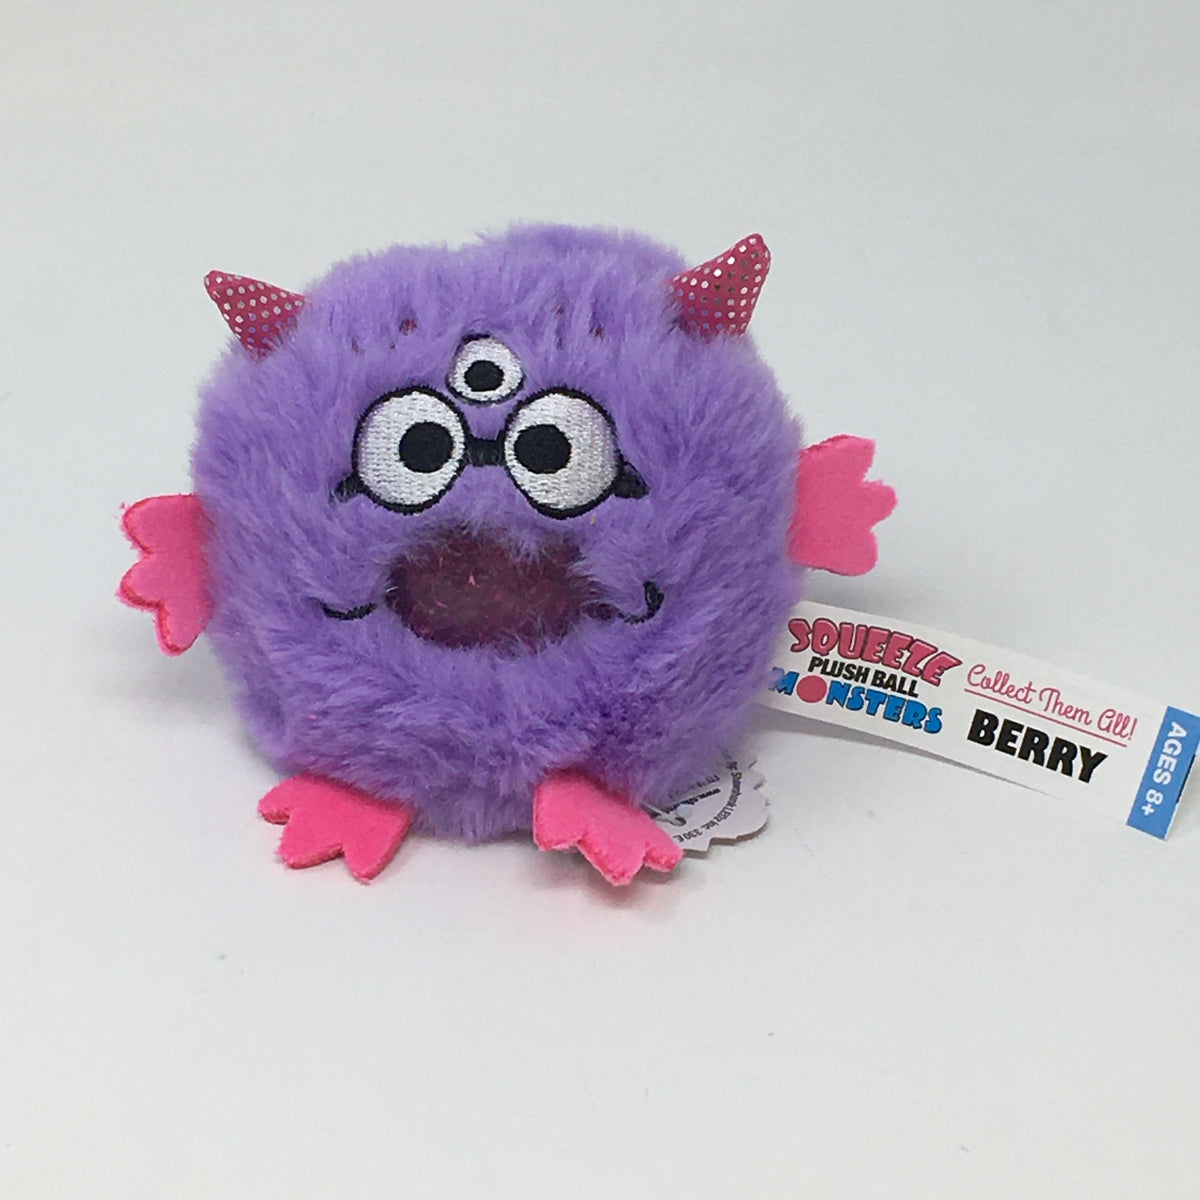 Squeeze Plush Ball Monsters